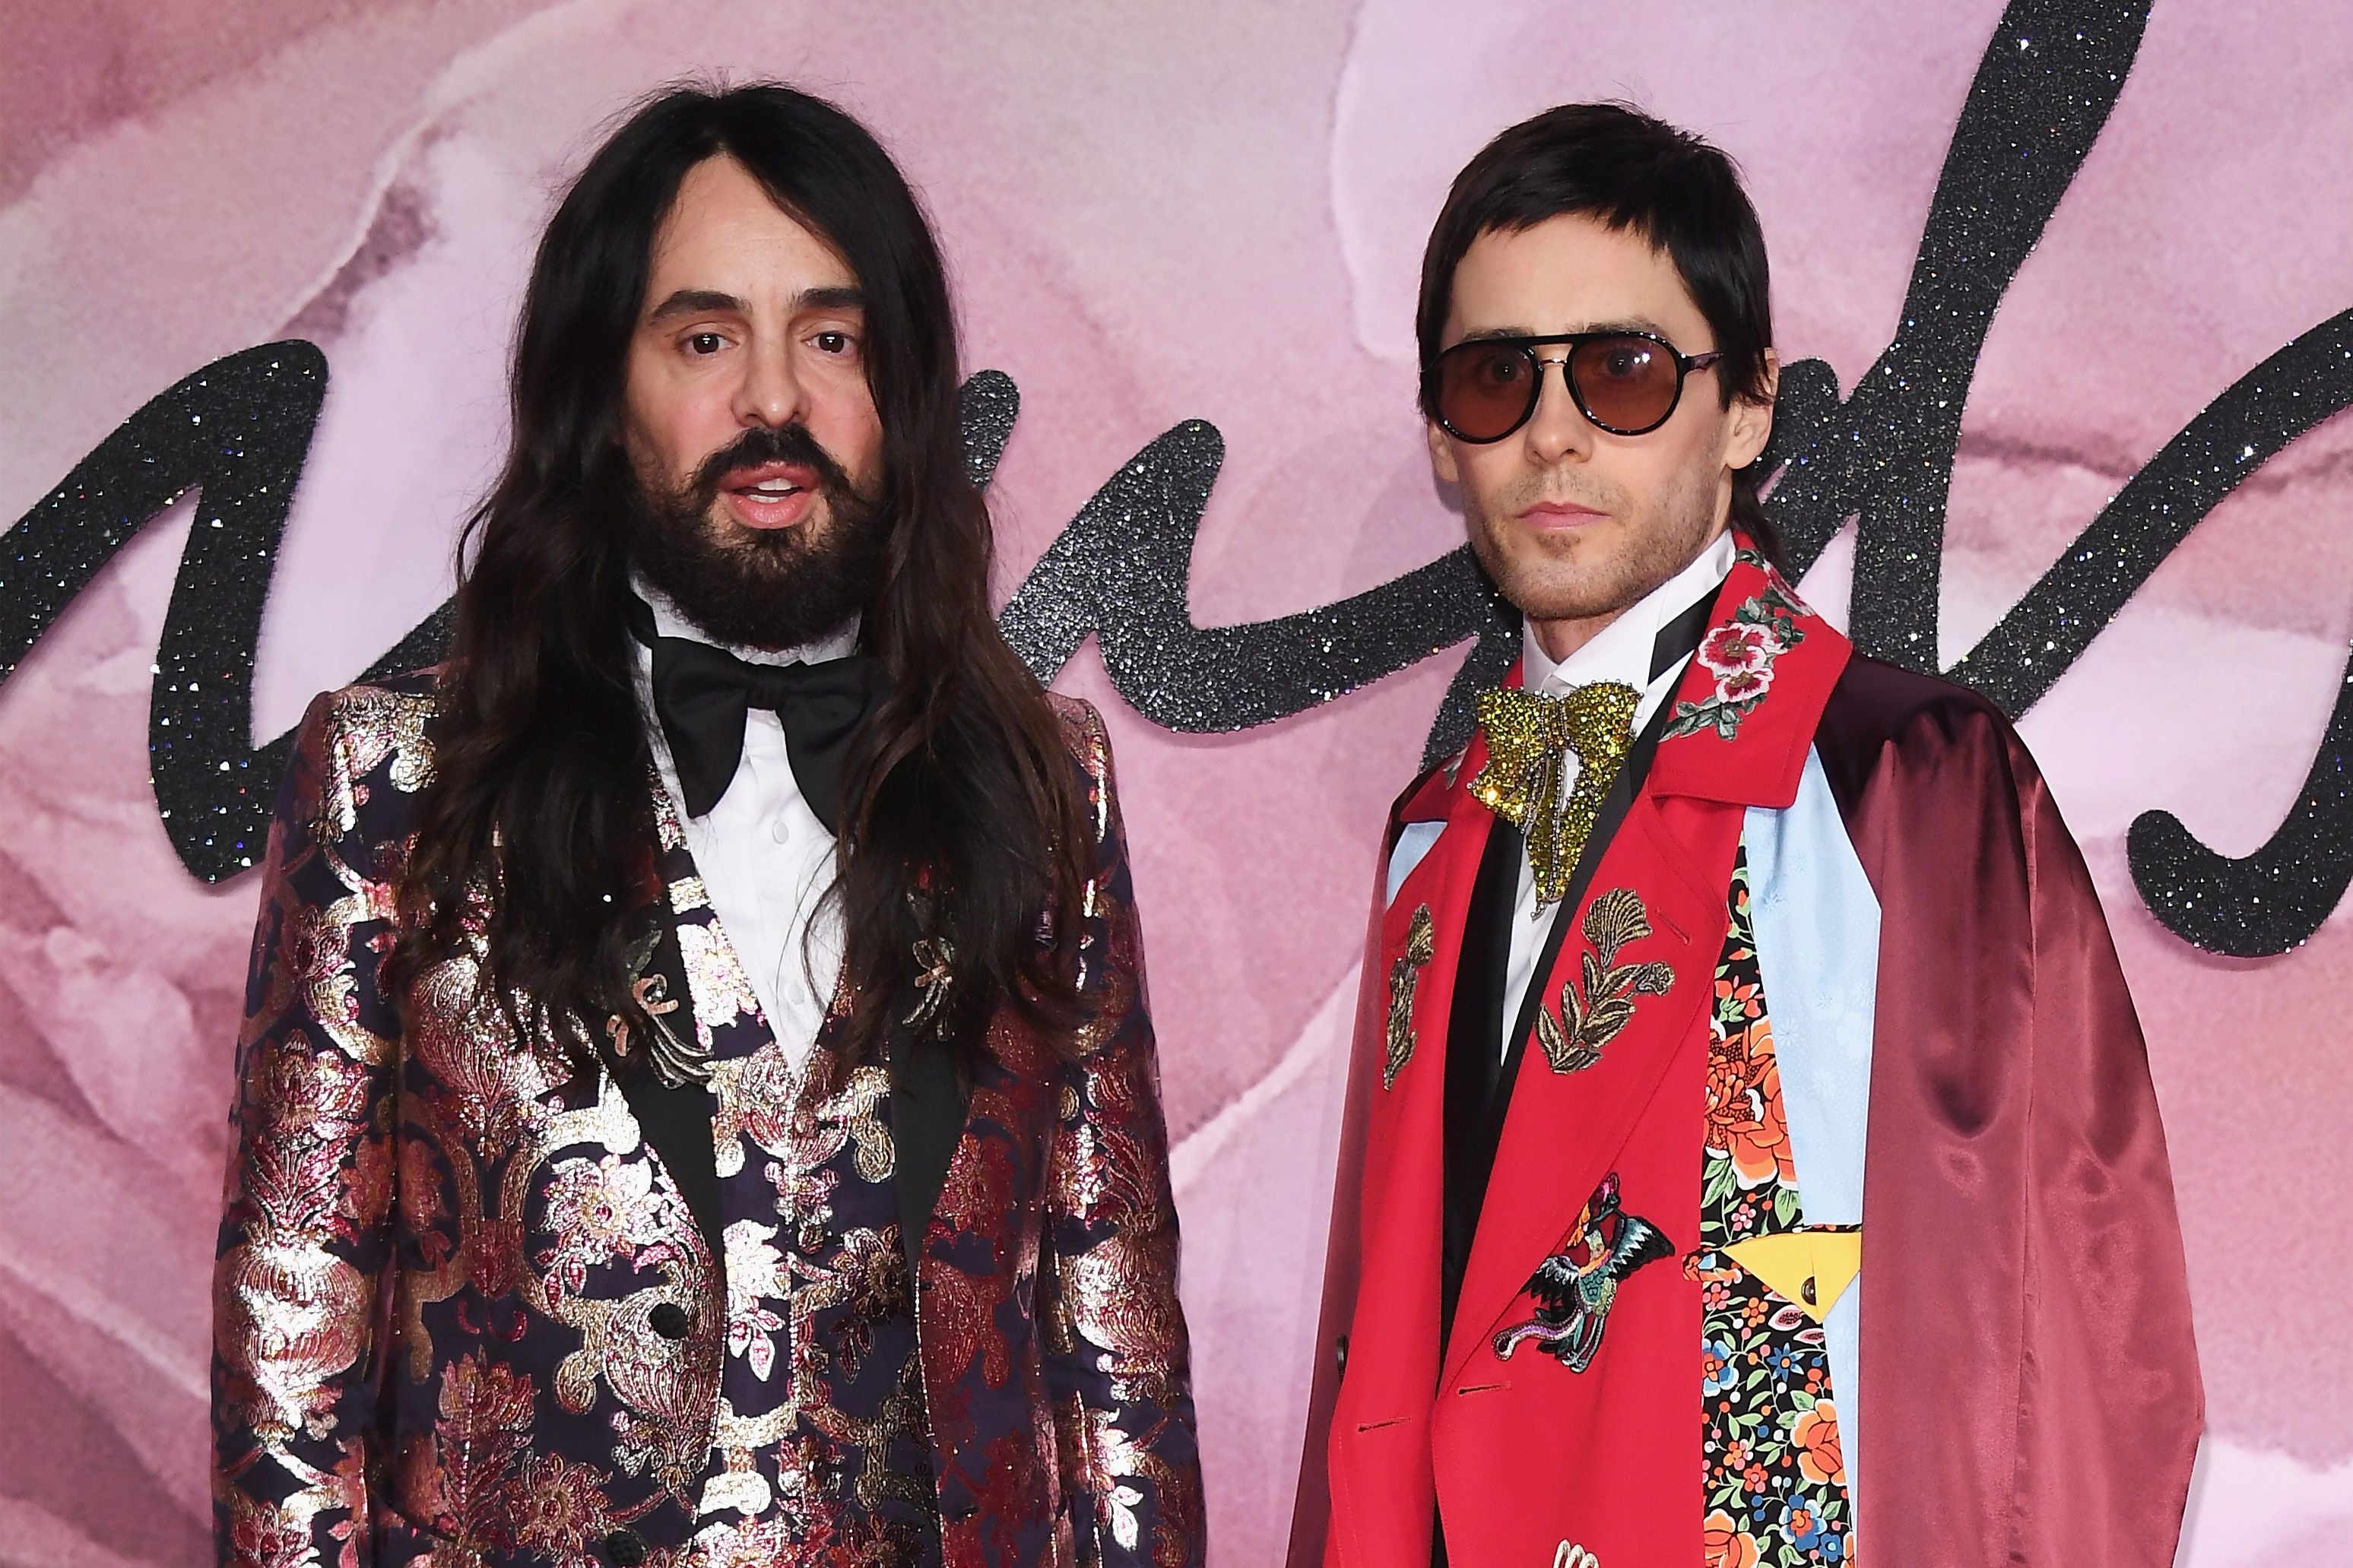 Alessandro Michele (right) for Gucci with Jared Leto. Winner of International Accessories